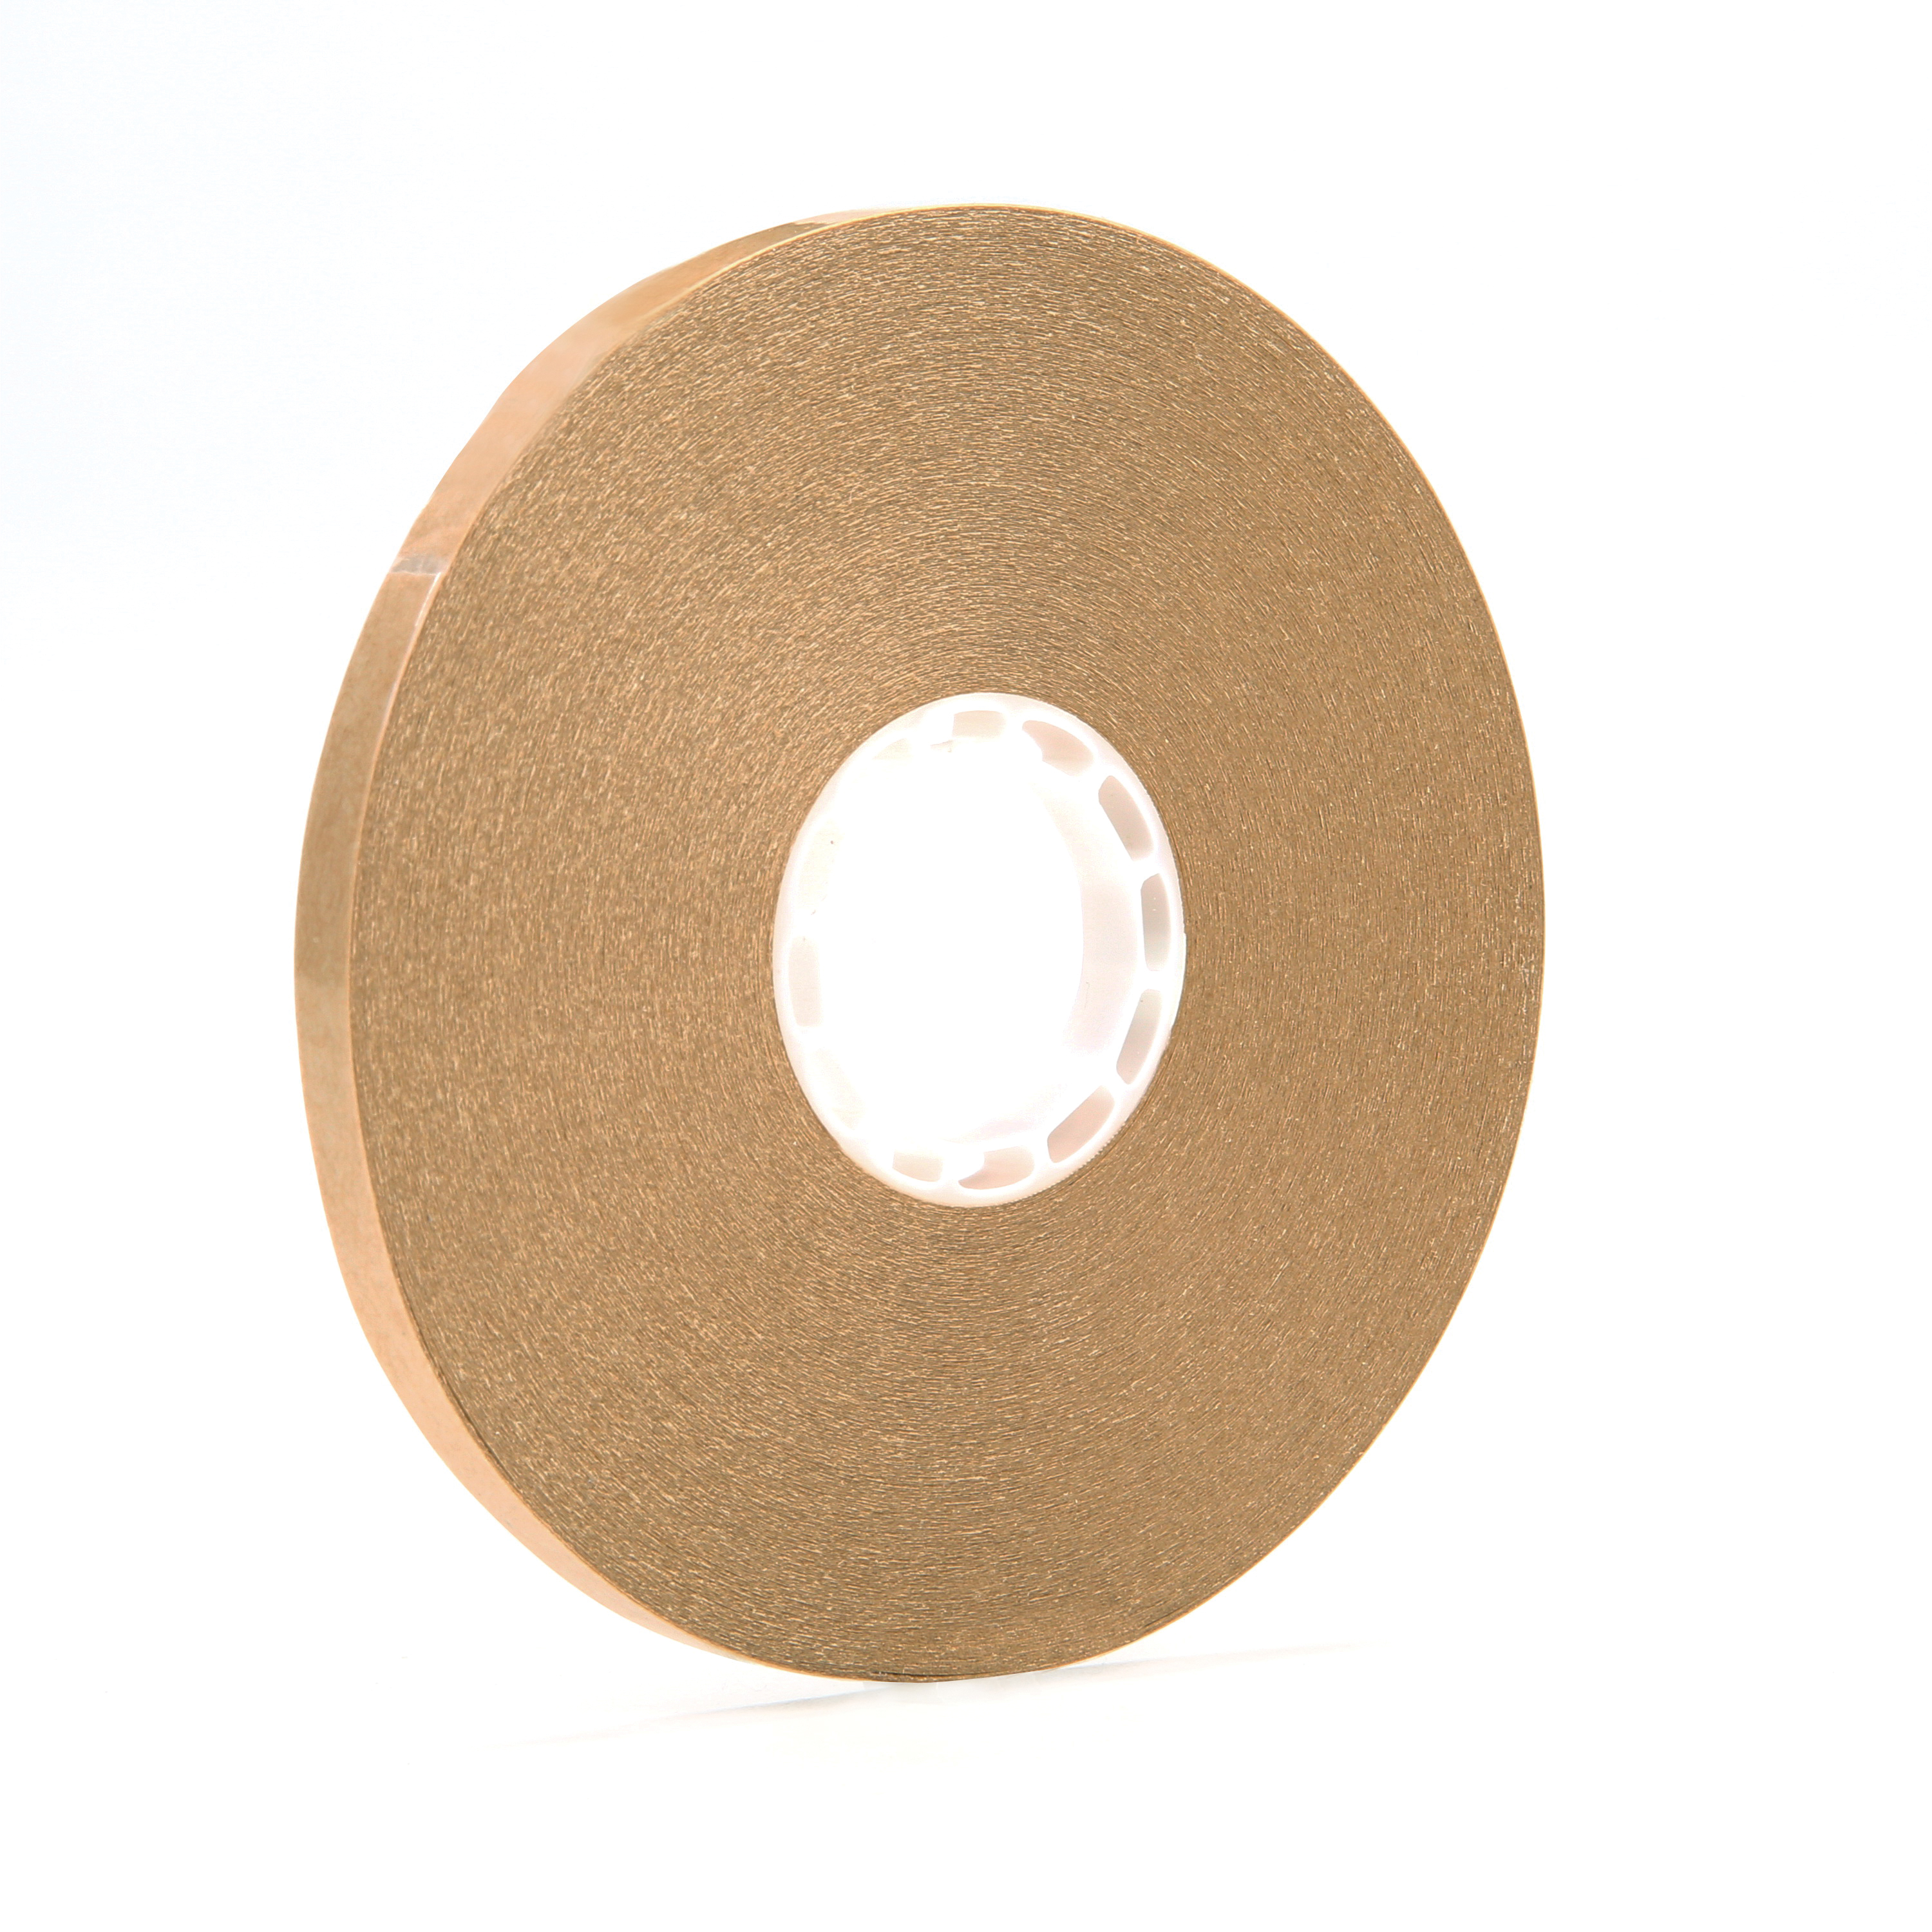 3M™ 021200-38443 Utility-Grade Adhesive Transfer Tape, 60 yd L x 1/4 in W, 2 mil THK, 1.7 mil 400 Acrylic Adhesive, Clear